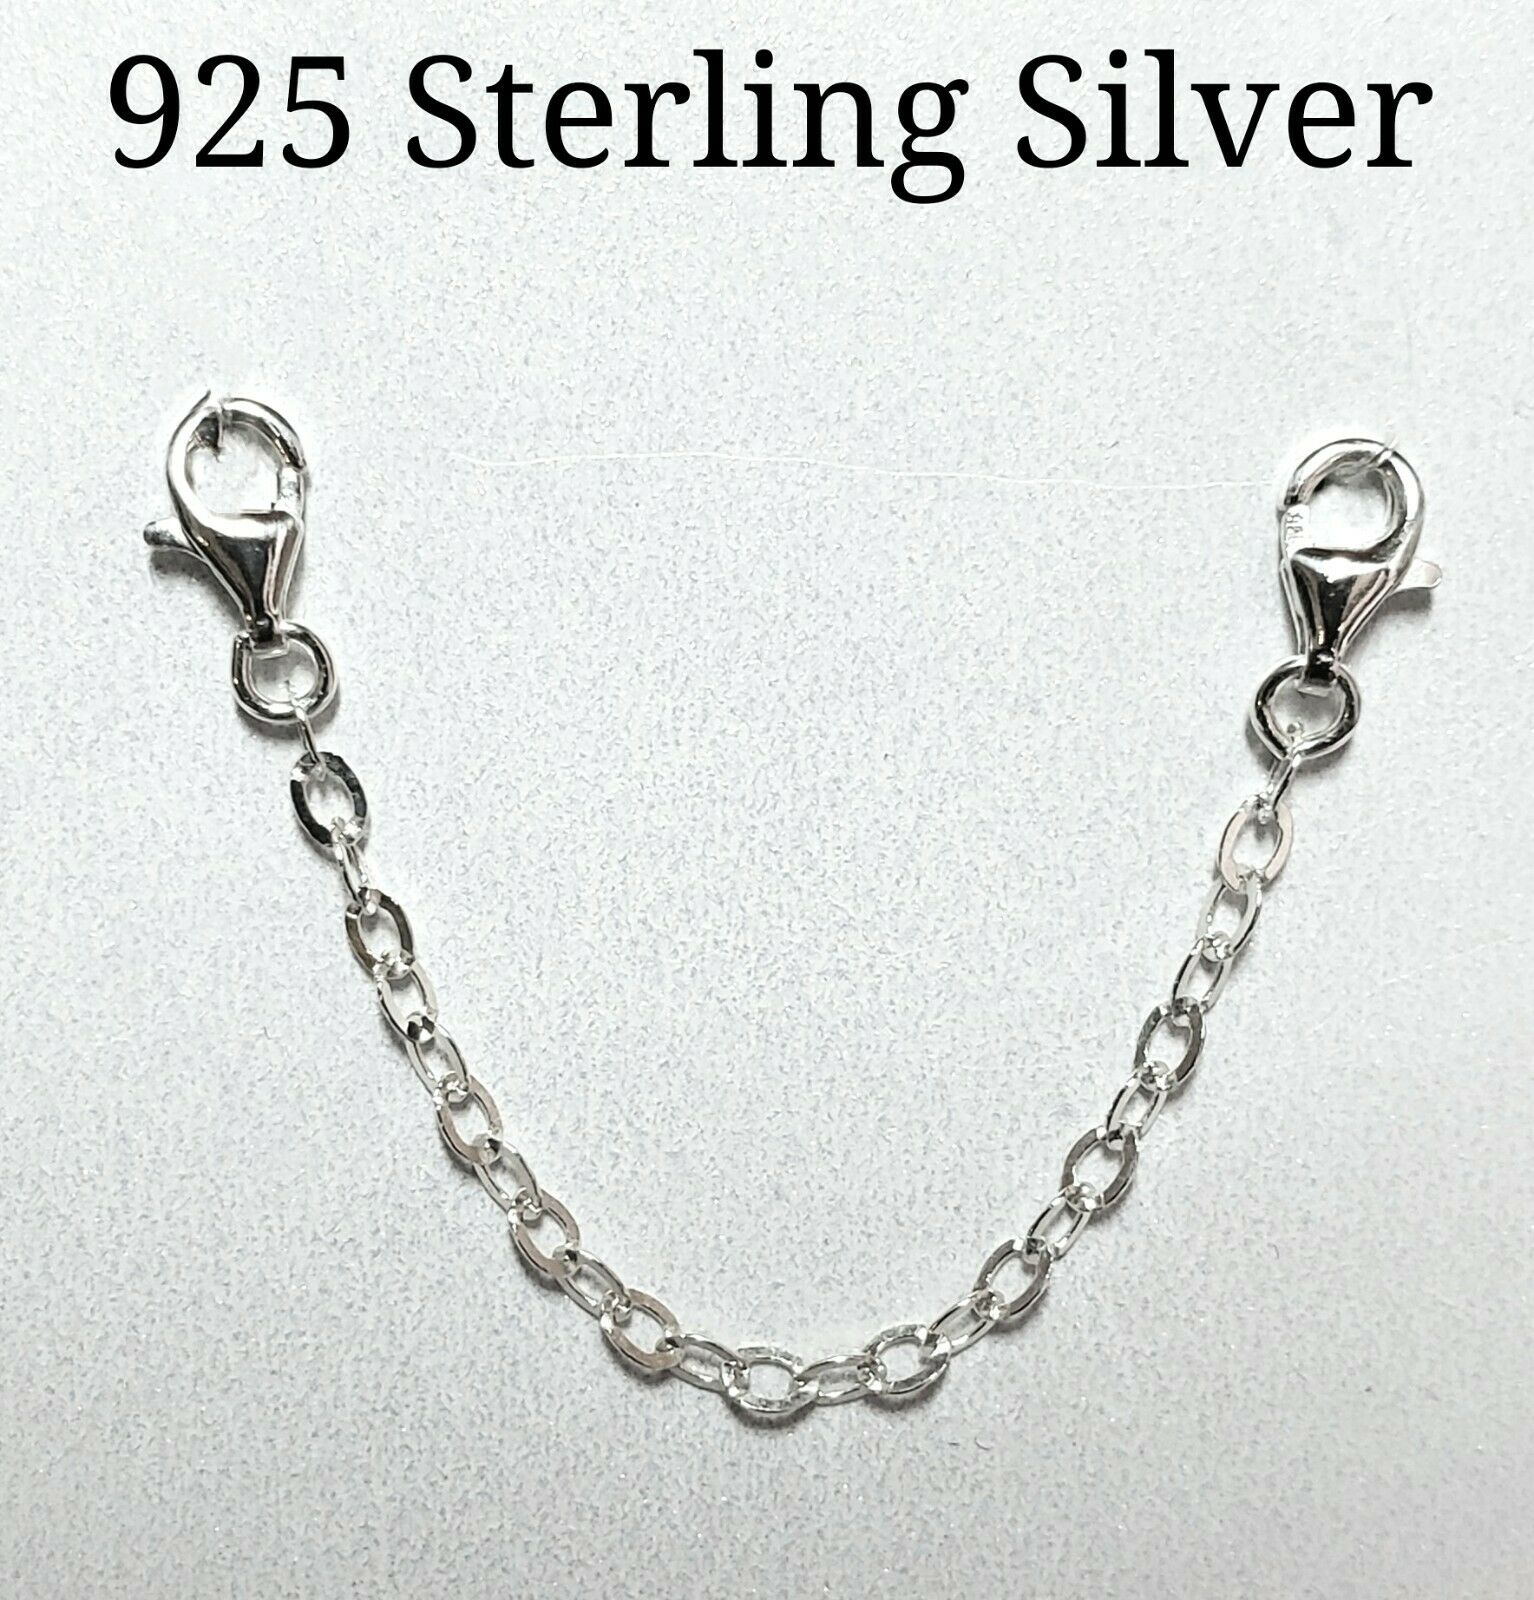 925 Sterling Silver Necklace/bracelet Extender Safety Chain Lobster Clasp